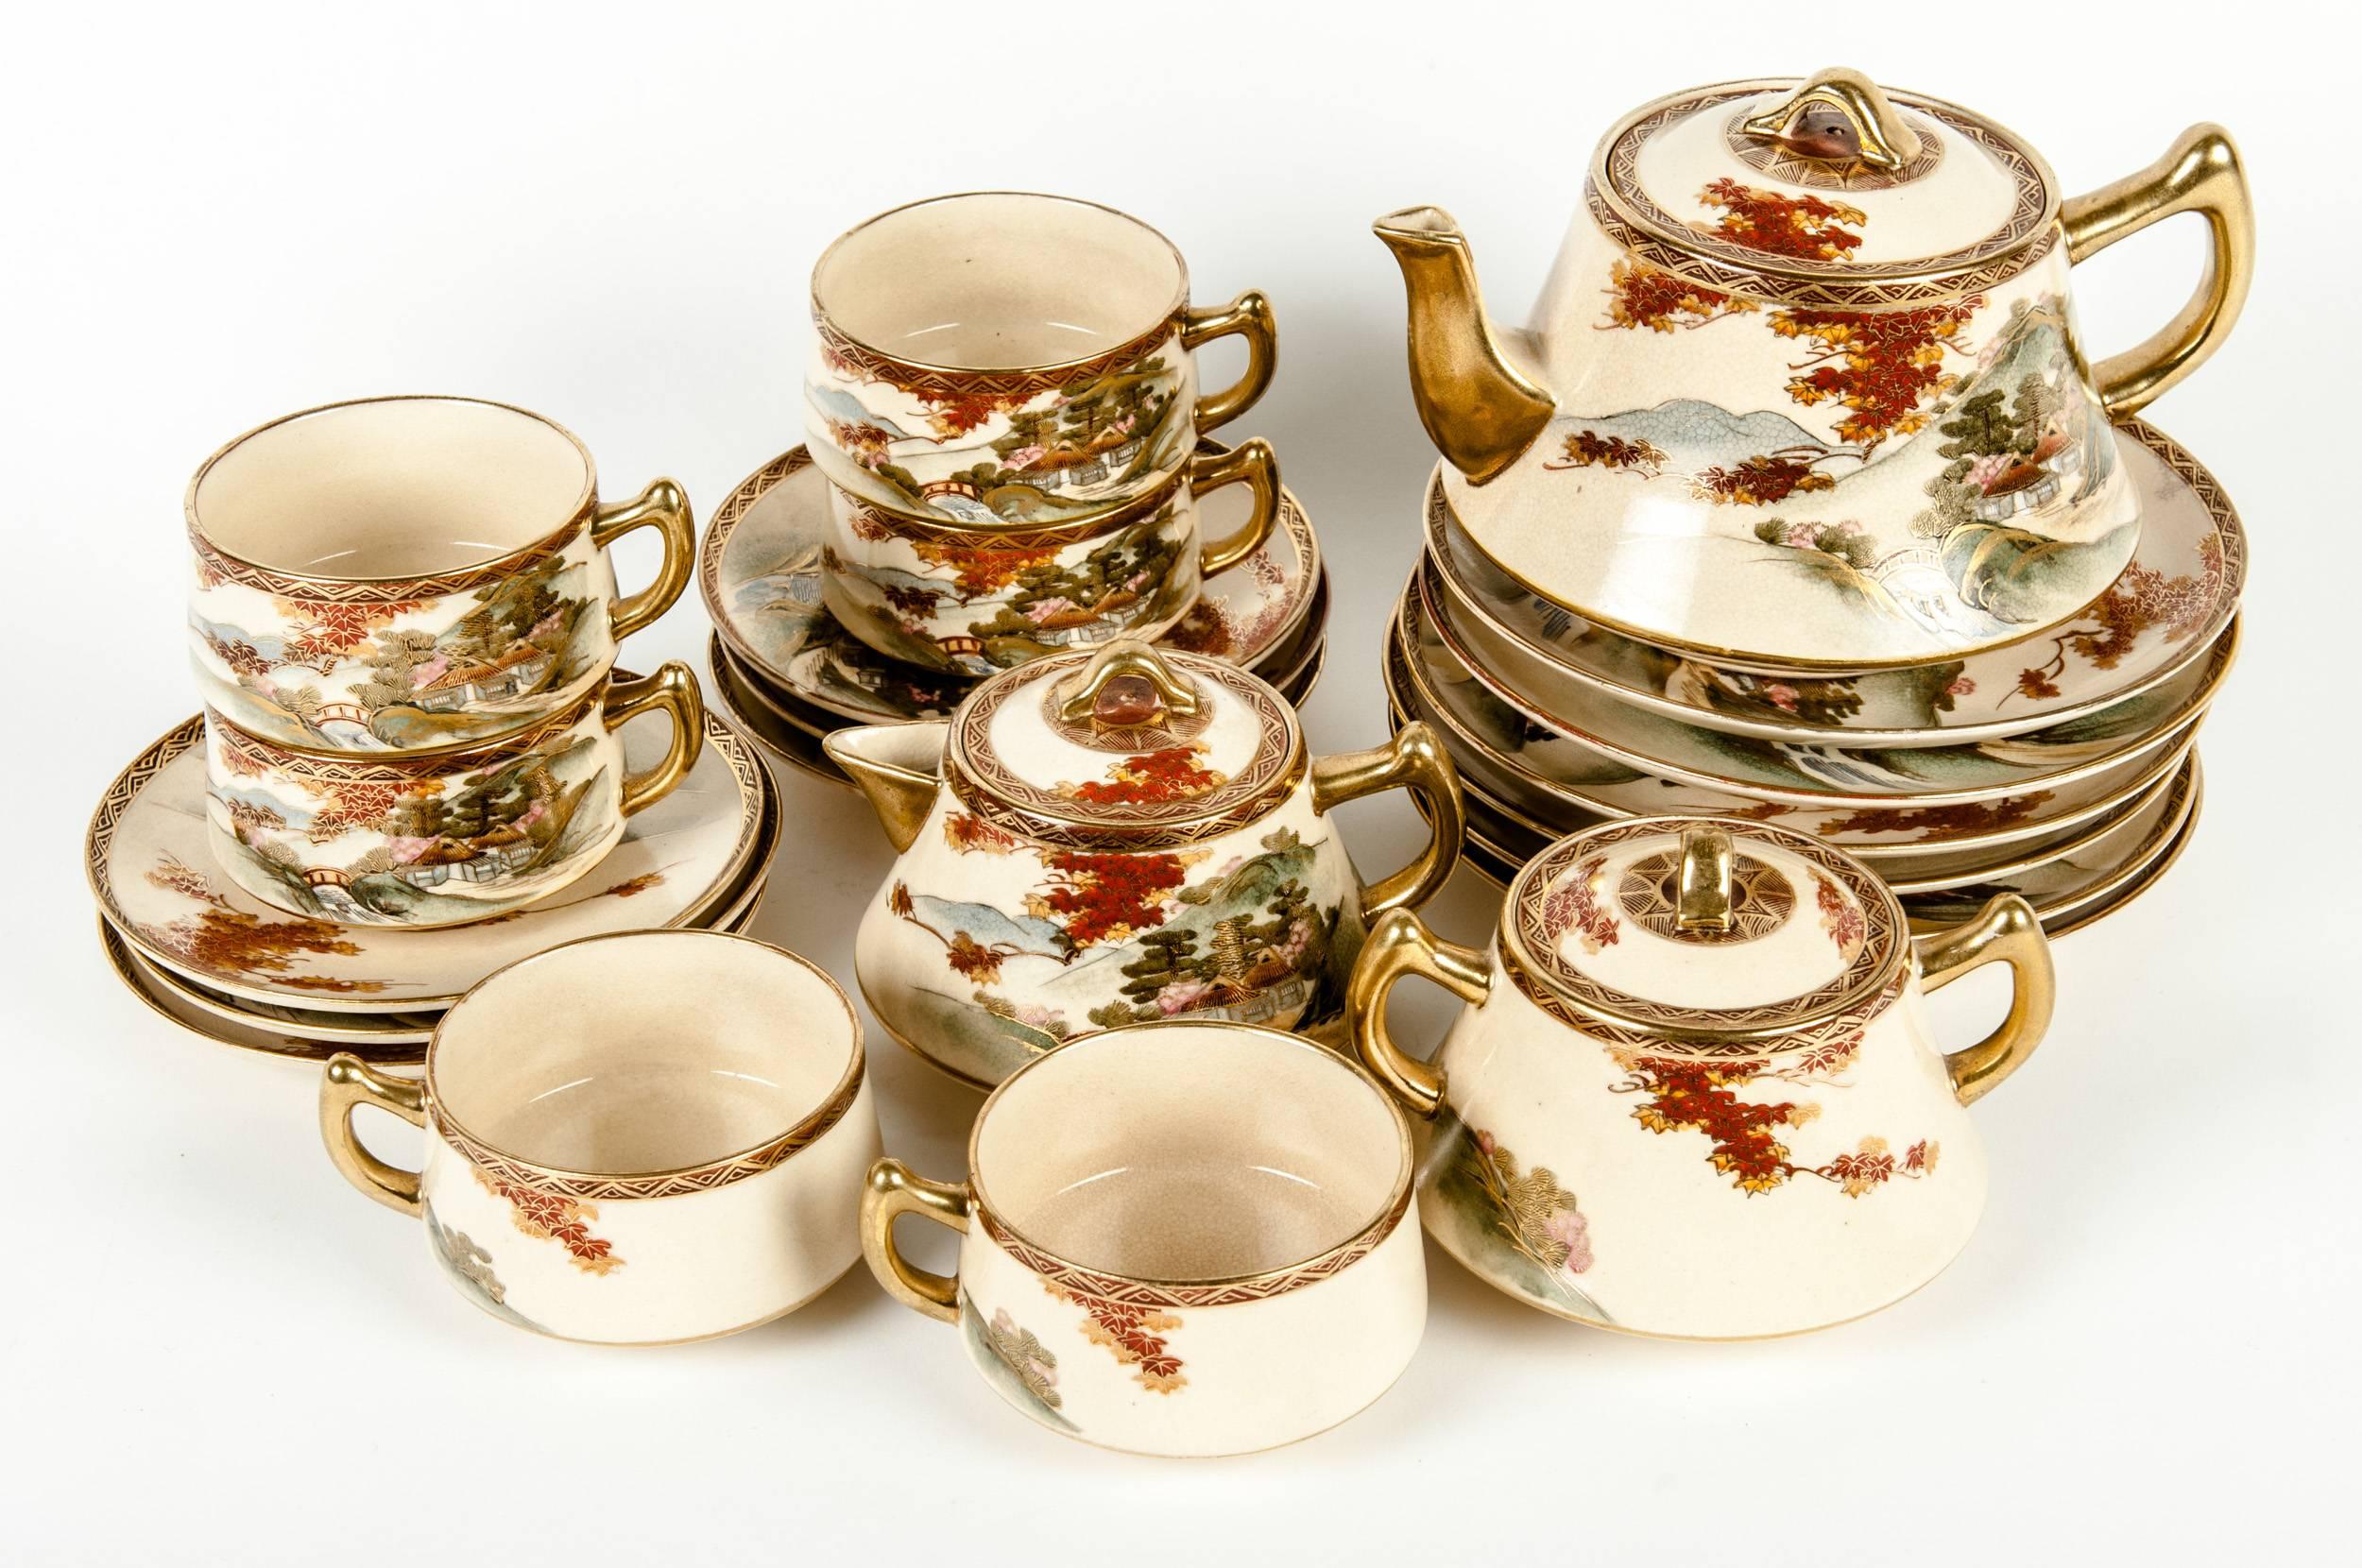 Vintage oriental tea service for six people. The tea pot measure 8 inches width x 4.5 inches high. The sugar bowl measure 5.5 inches width x 3 inches high. The creamer measure 6 inches width x 3 inches high.